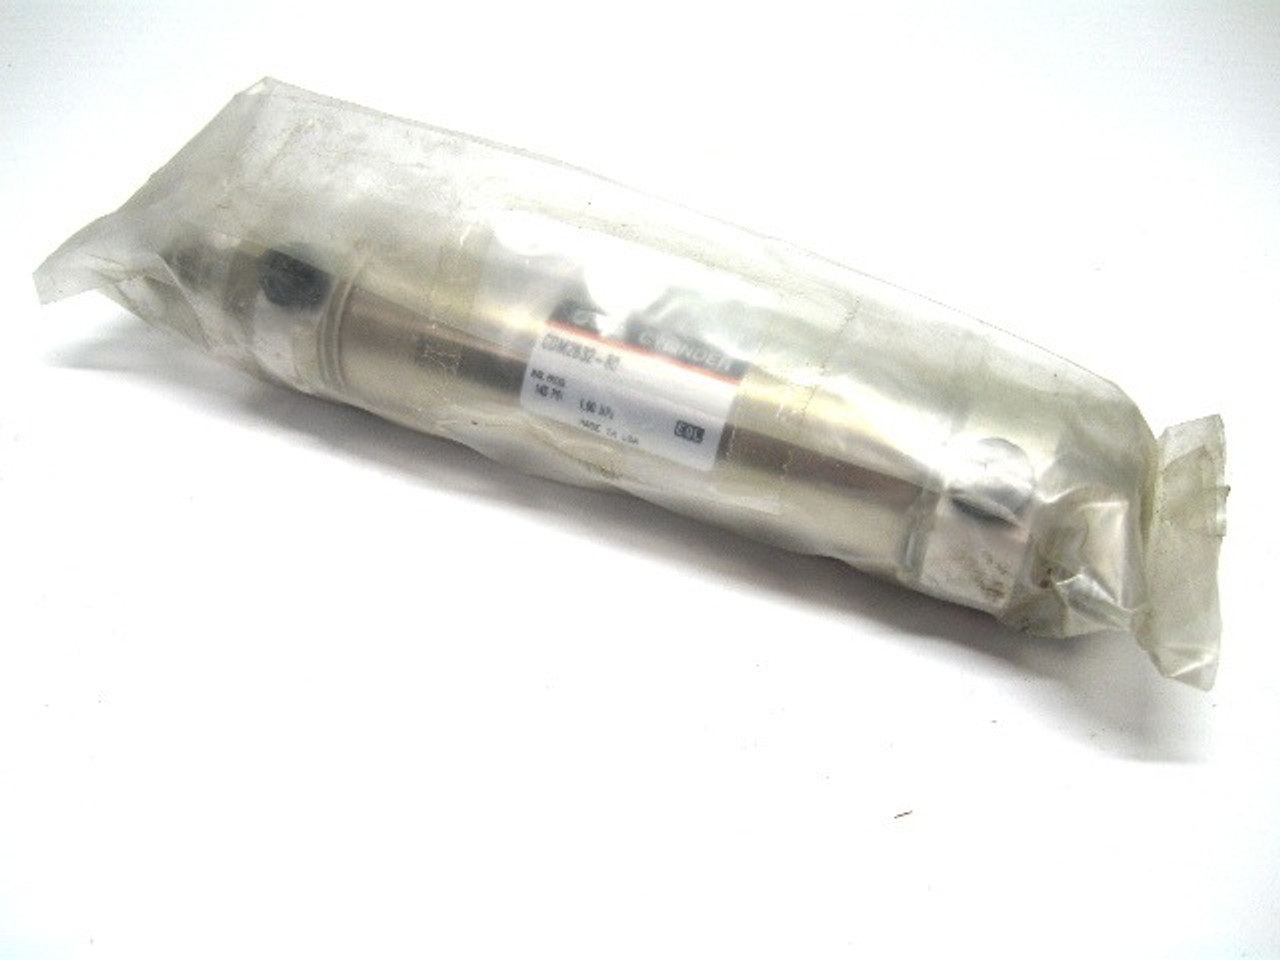 Smc CDM2B32-80 Double Acting Pneumatic Cylinder 32mm Bore 80mm Stroke New